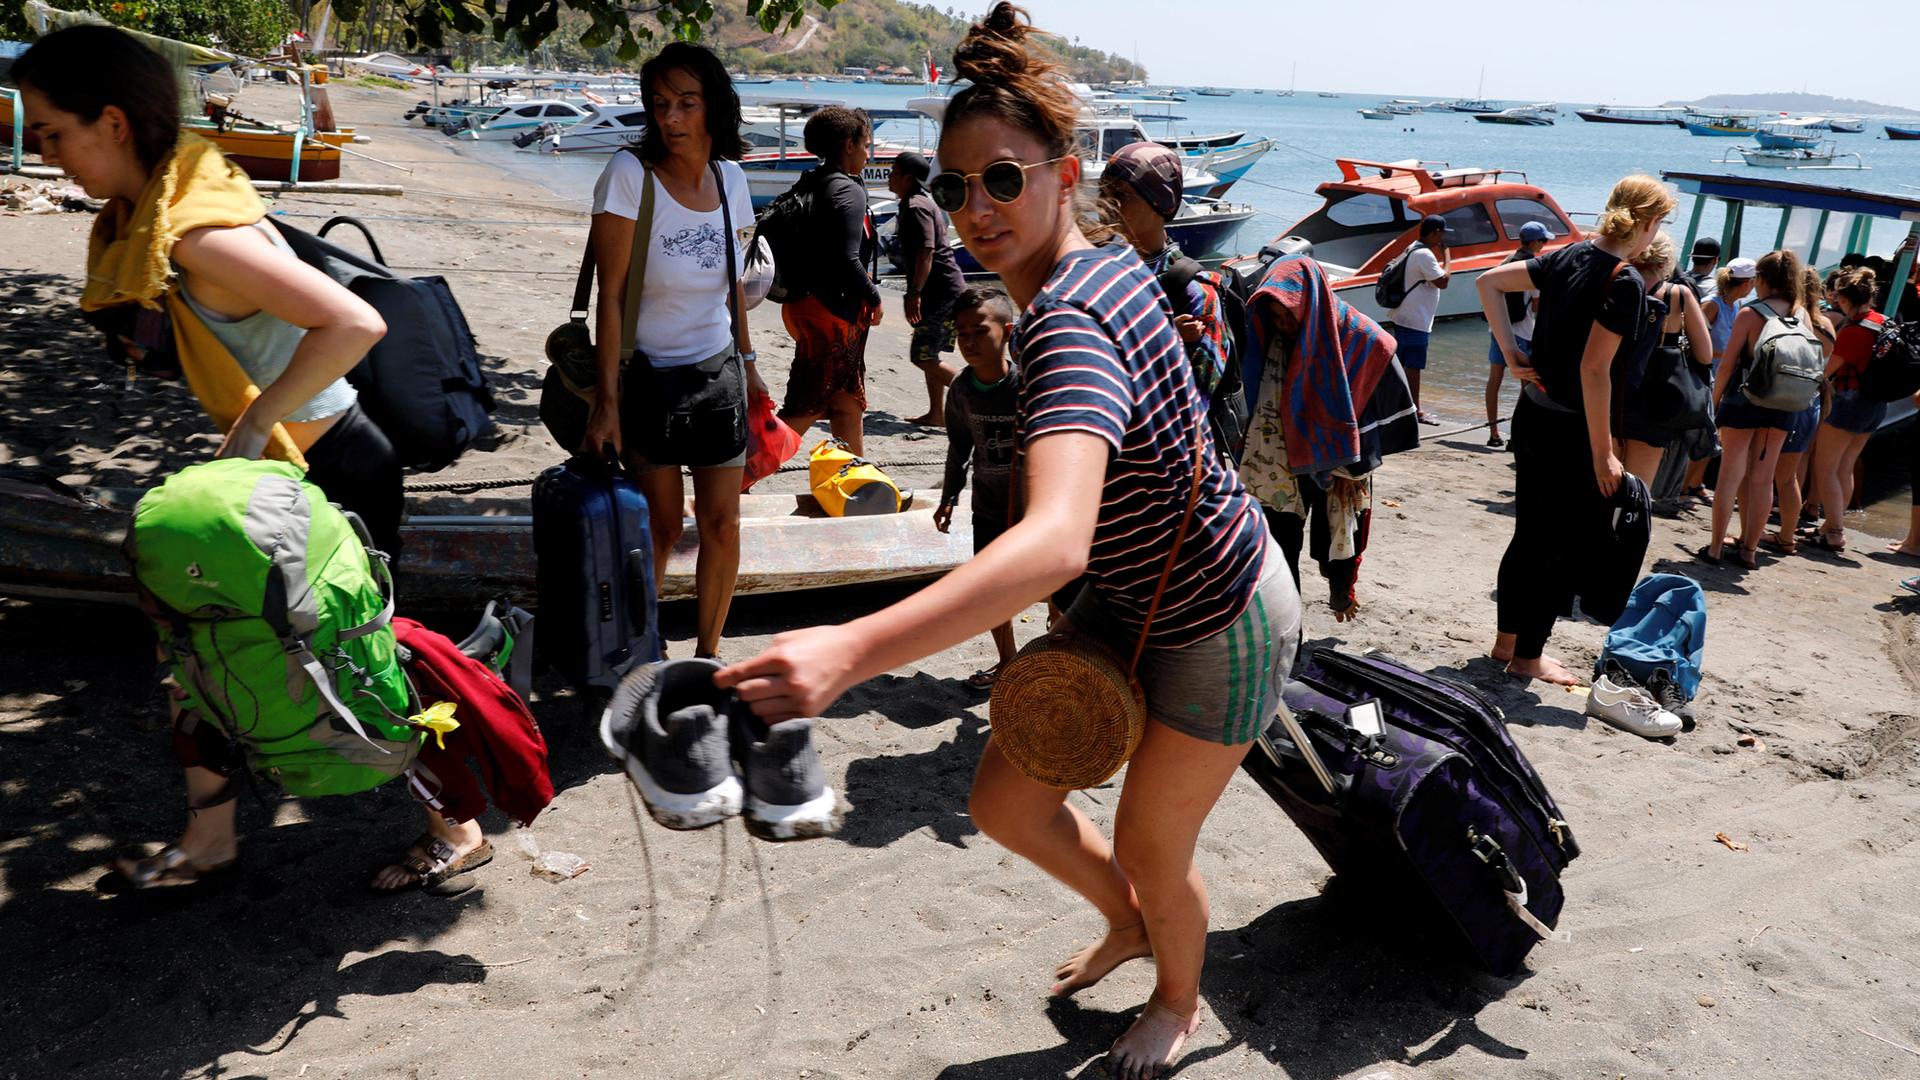 Foreign tourists carry their backpacks and rollaboards across the sandy beach after an earthquake hit Lombok island in Indonesia August 6, 2018.